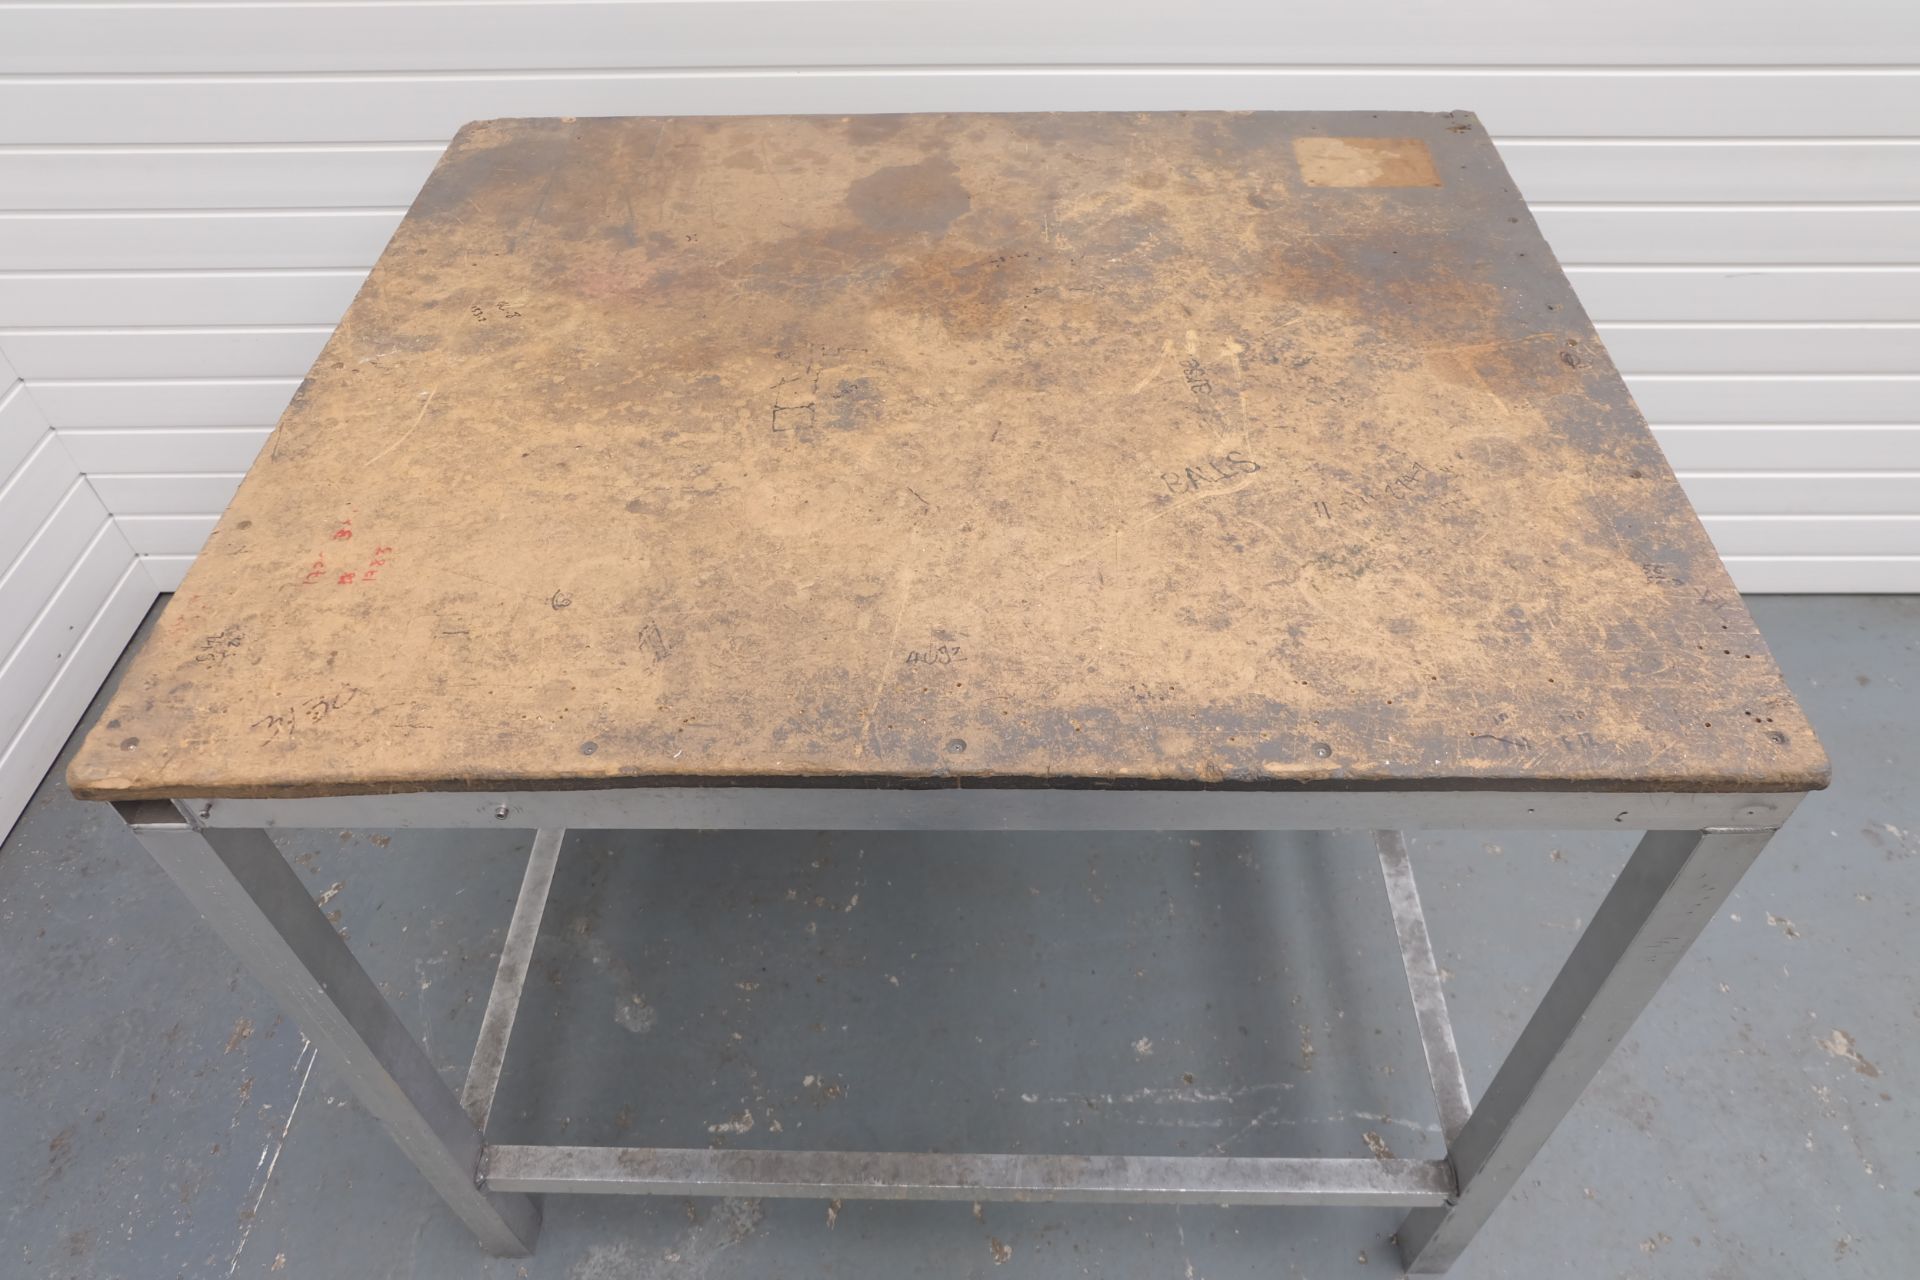 Aluminium Frame Table With Wooden Top. Size 1200mm x 1000mm. Height 1020mm. - Image 3 of 3